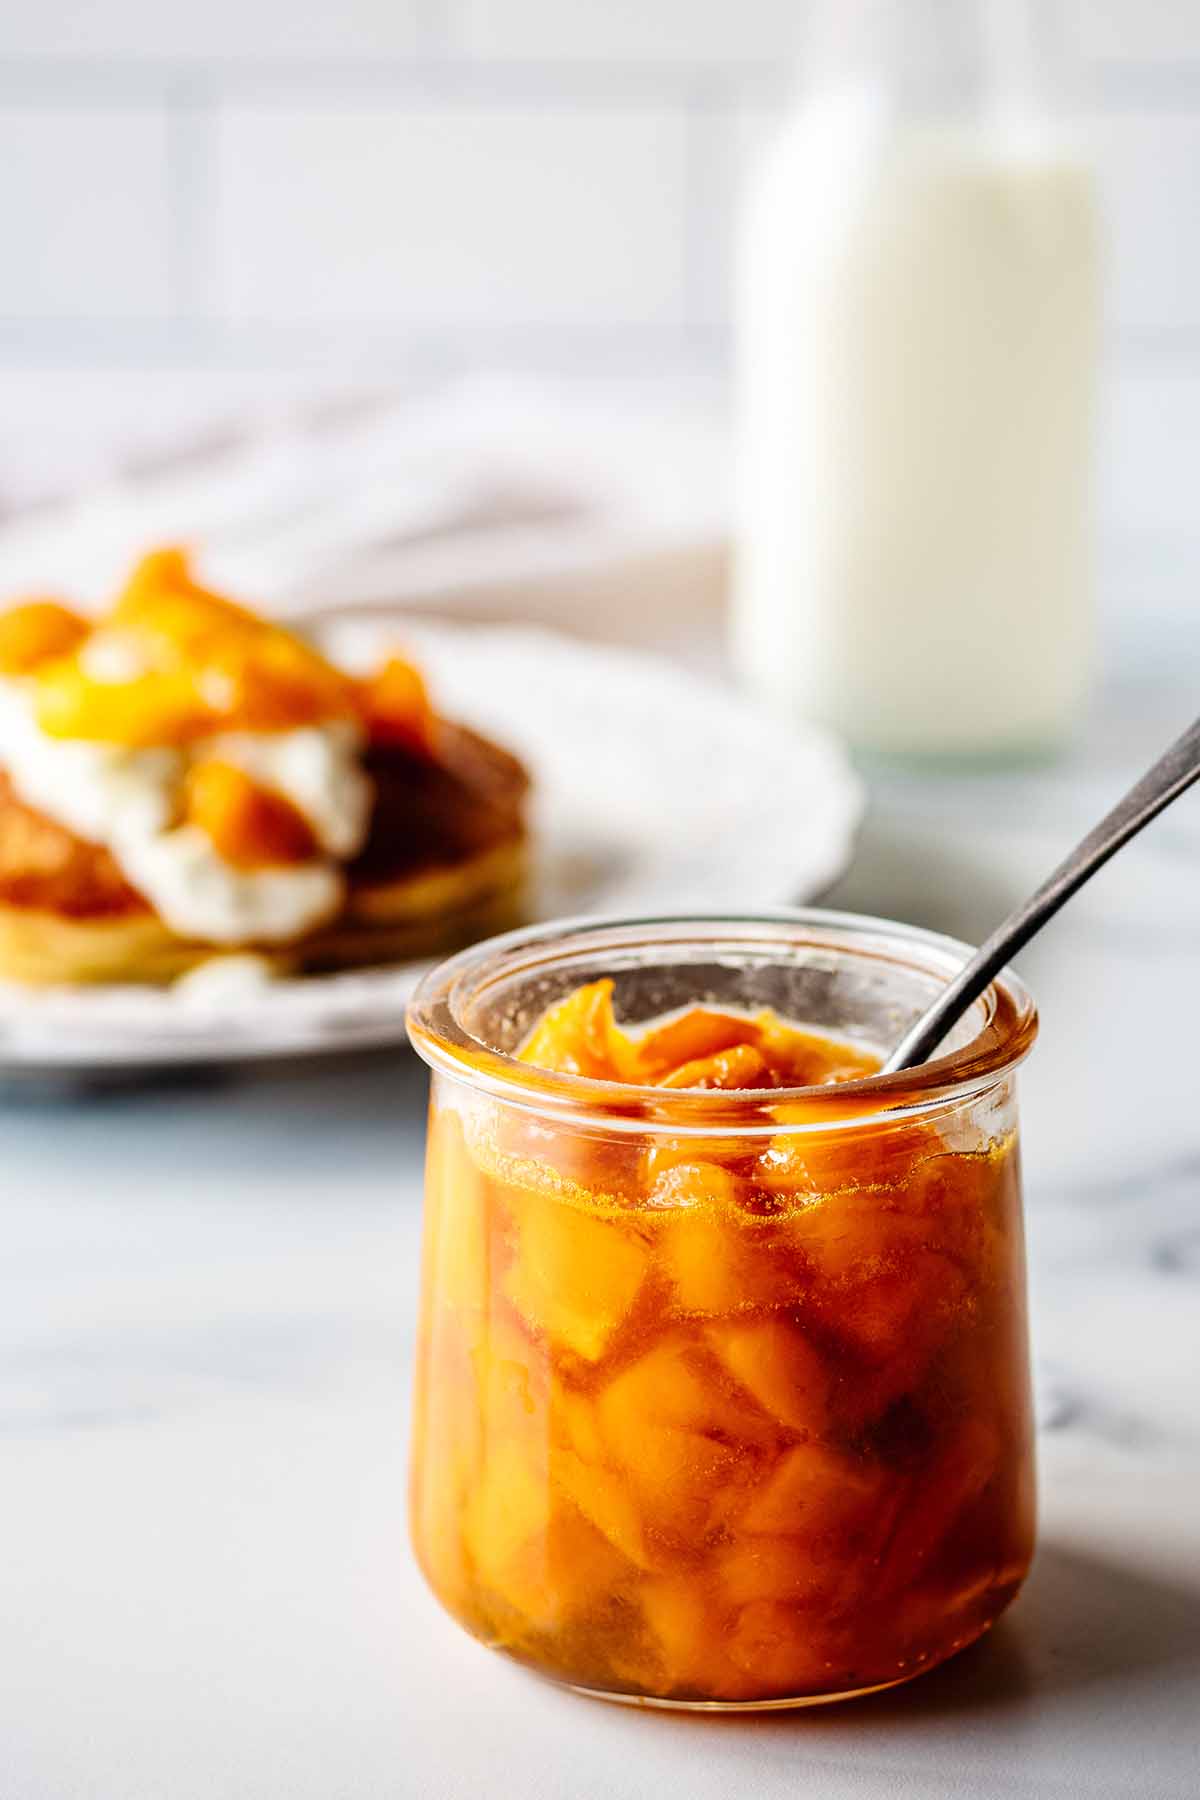 Mango compote in a small glass jar with a spoon